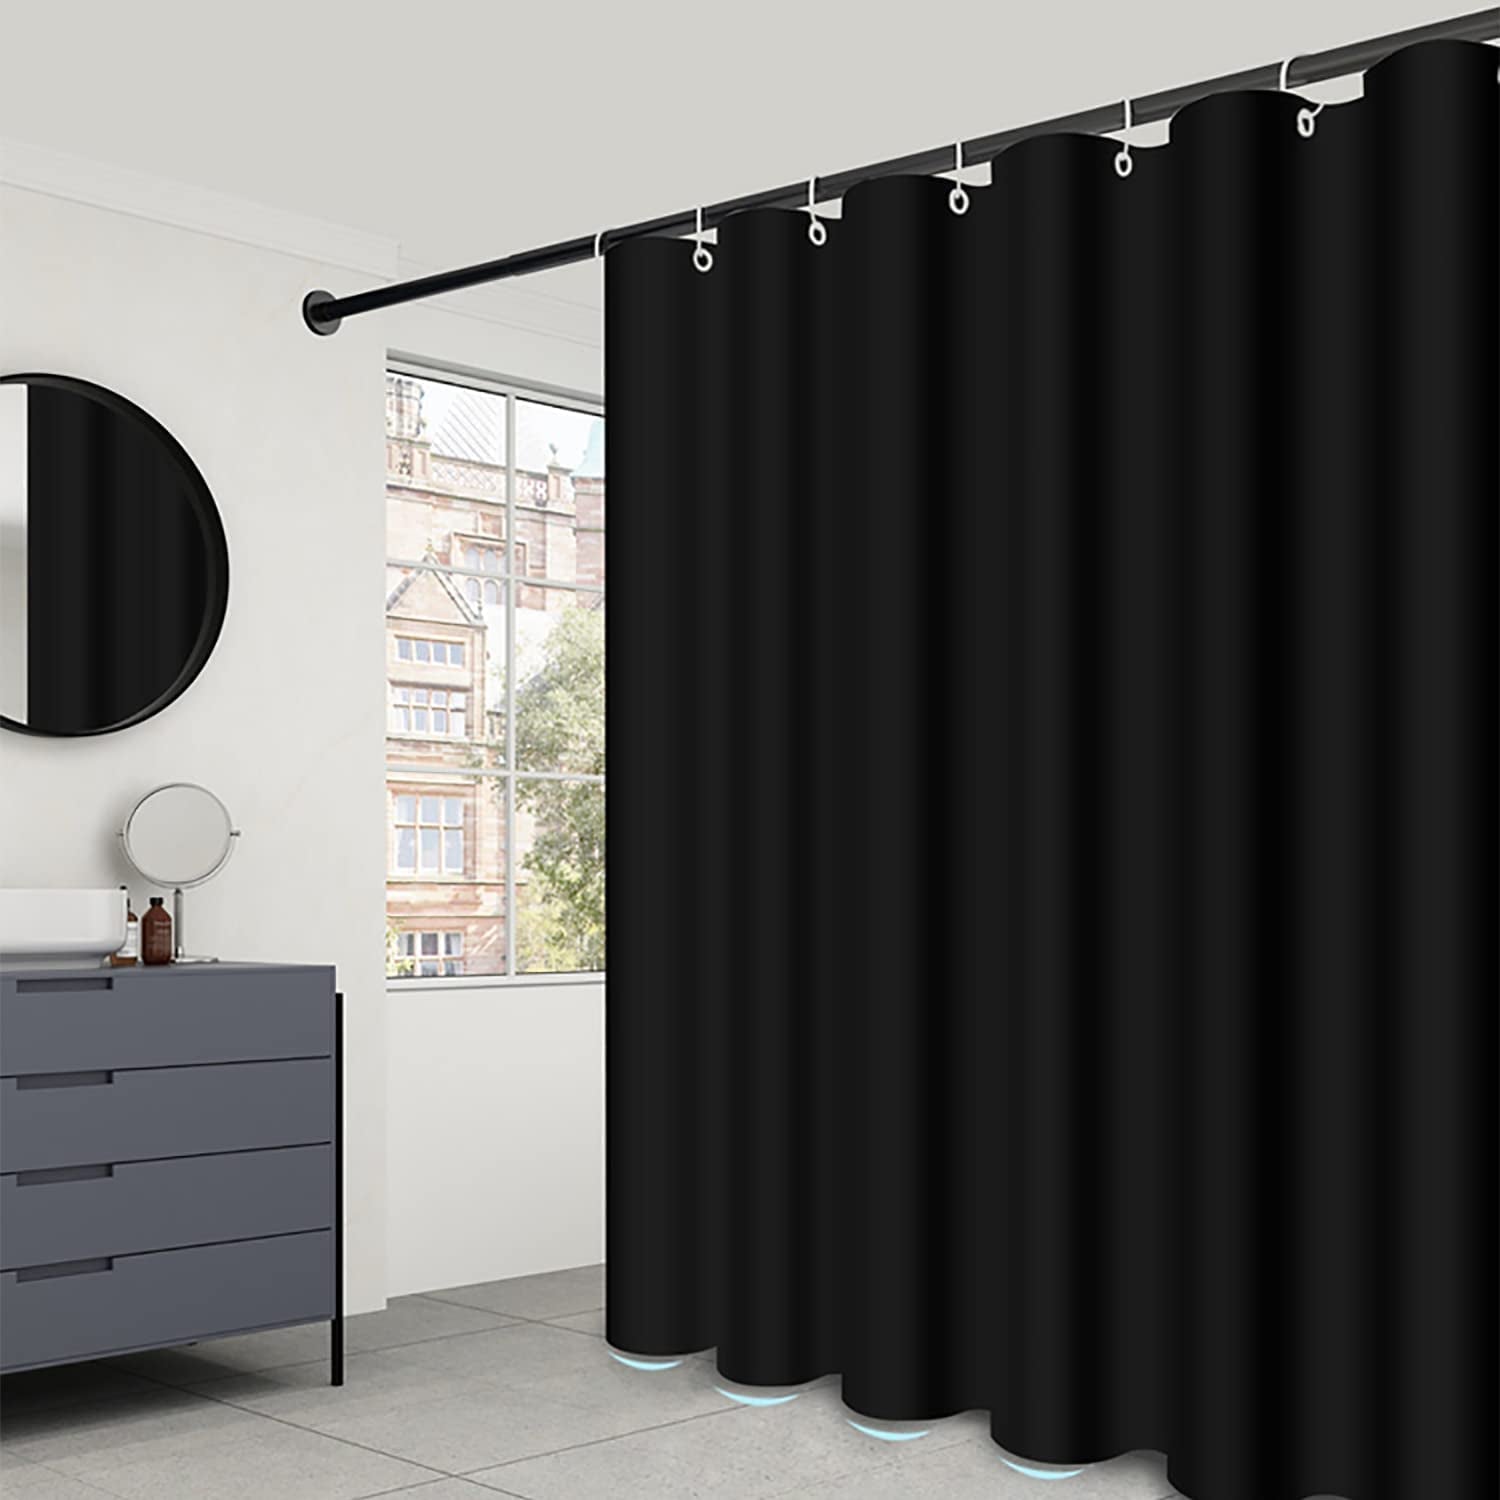 Fabric Shower Curtain Liner, Waterproof Hotel Quality, Bathroom Curtains Rust Resistant Grommets, 72 X 72 Machine Washable (Black)